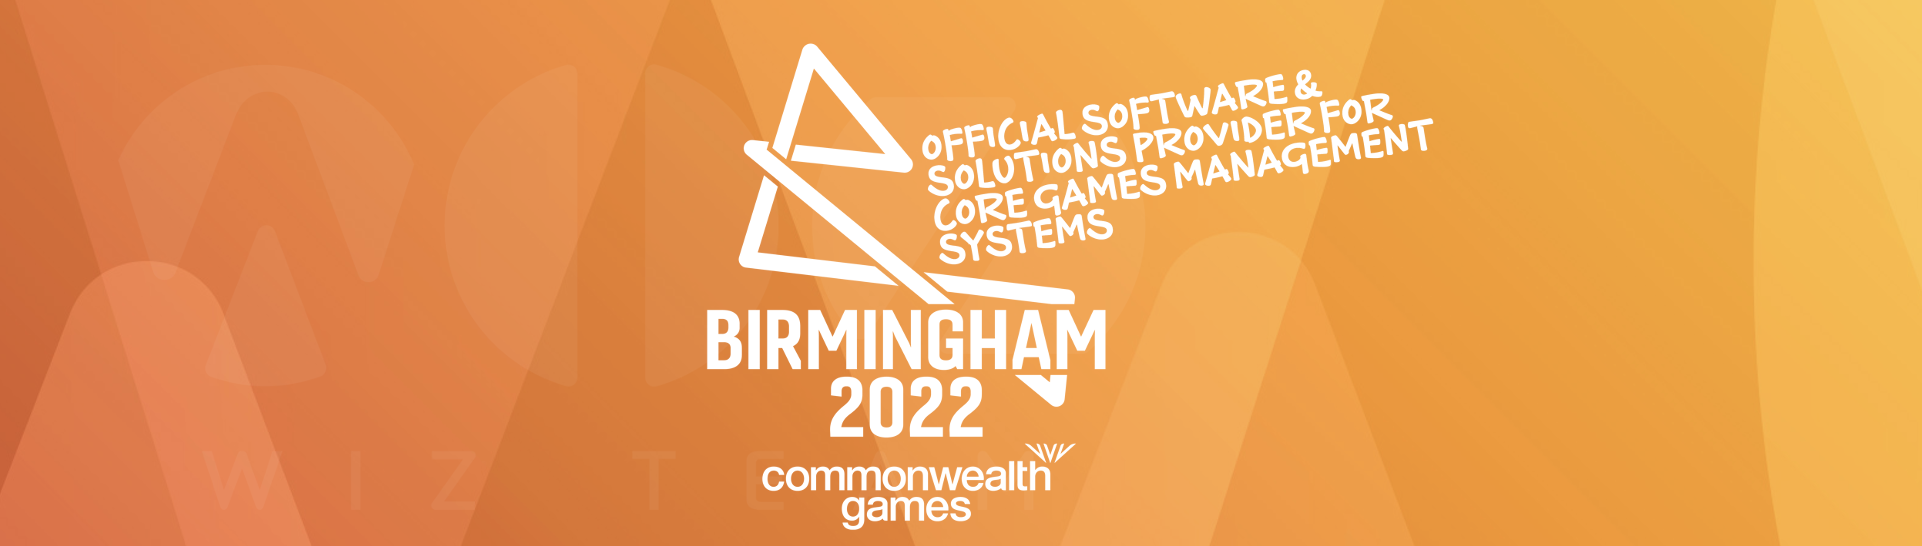 Birmingham 2022 signs five more sponsors to provide services and systems at Commonwealth Games